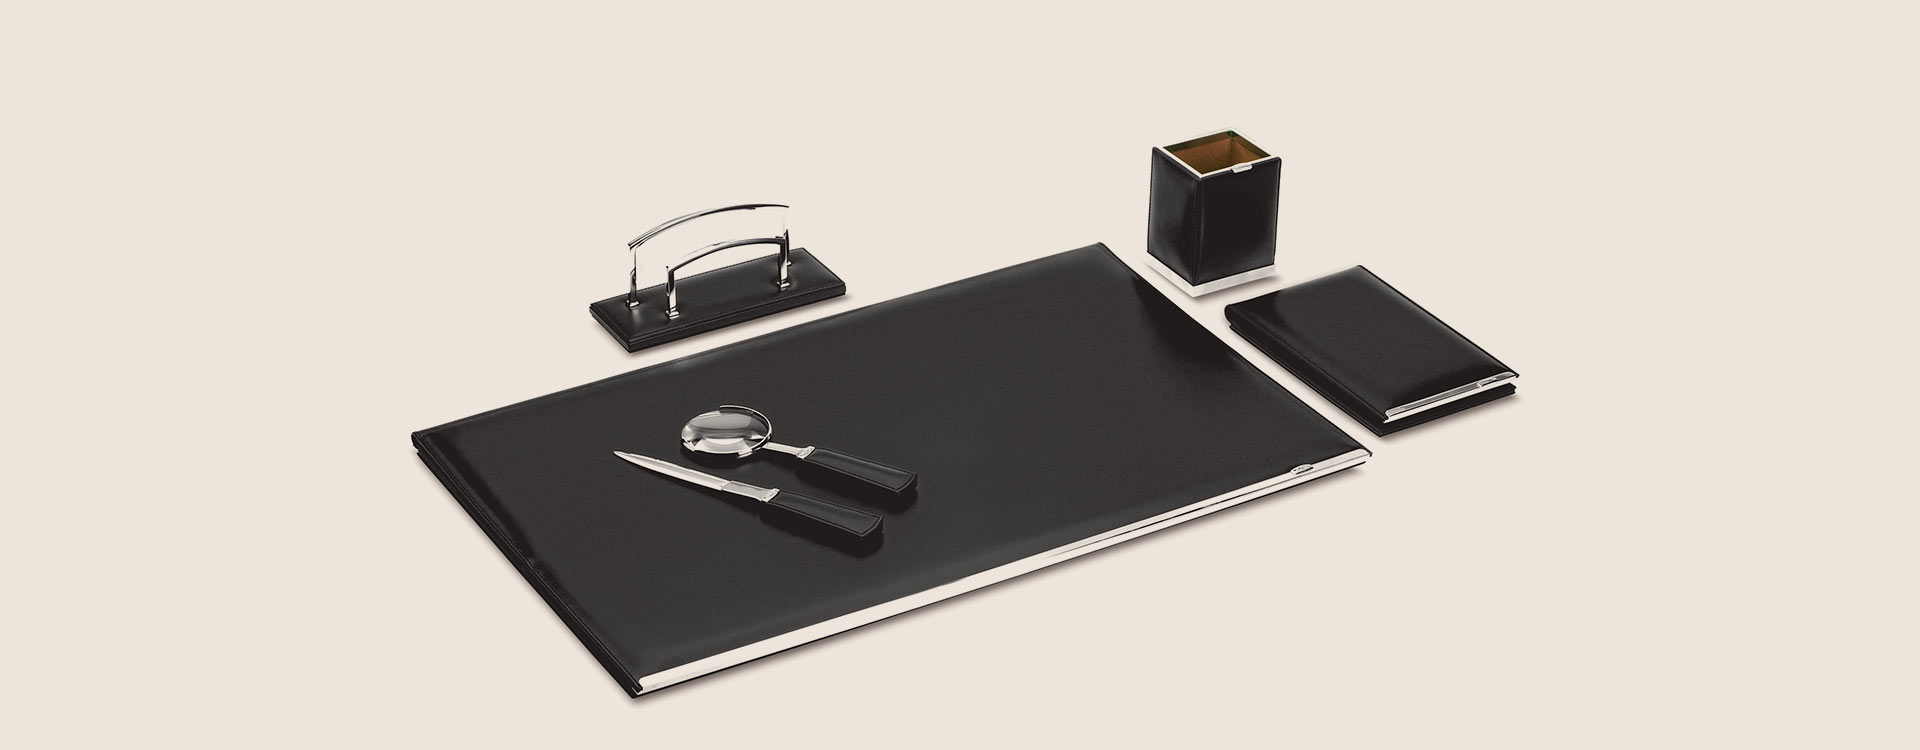 Luxury leather desk sets and accessories